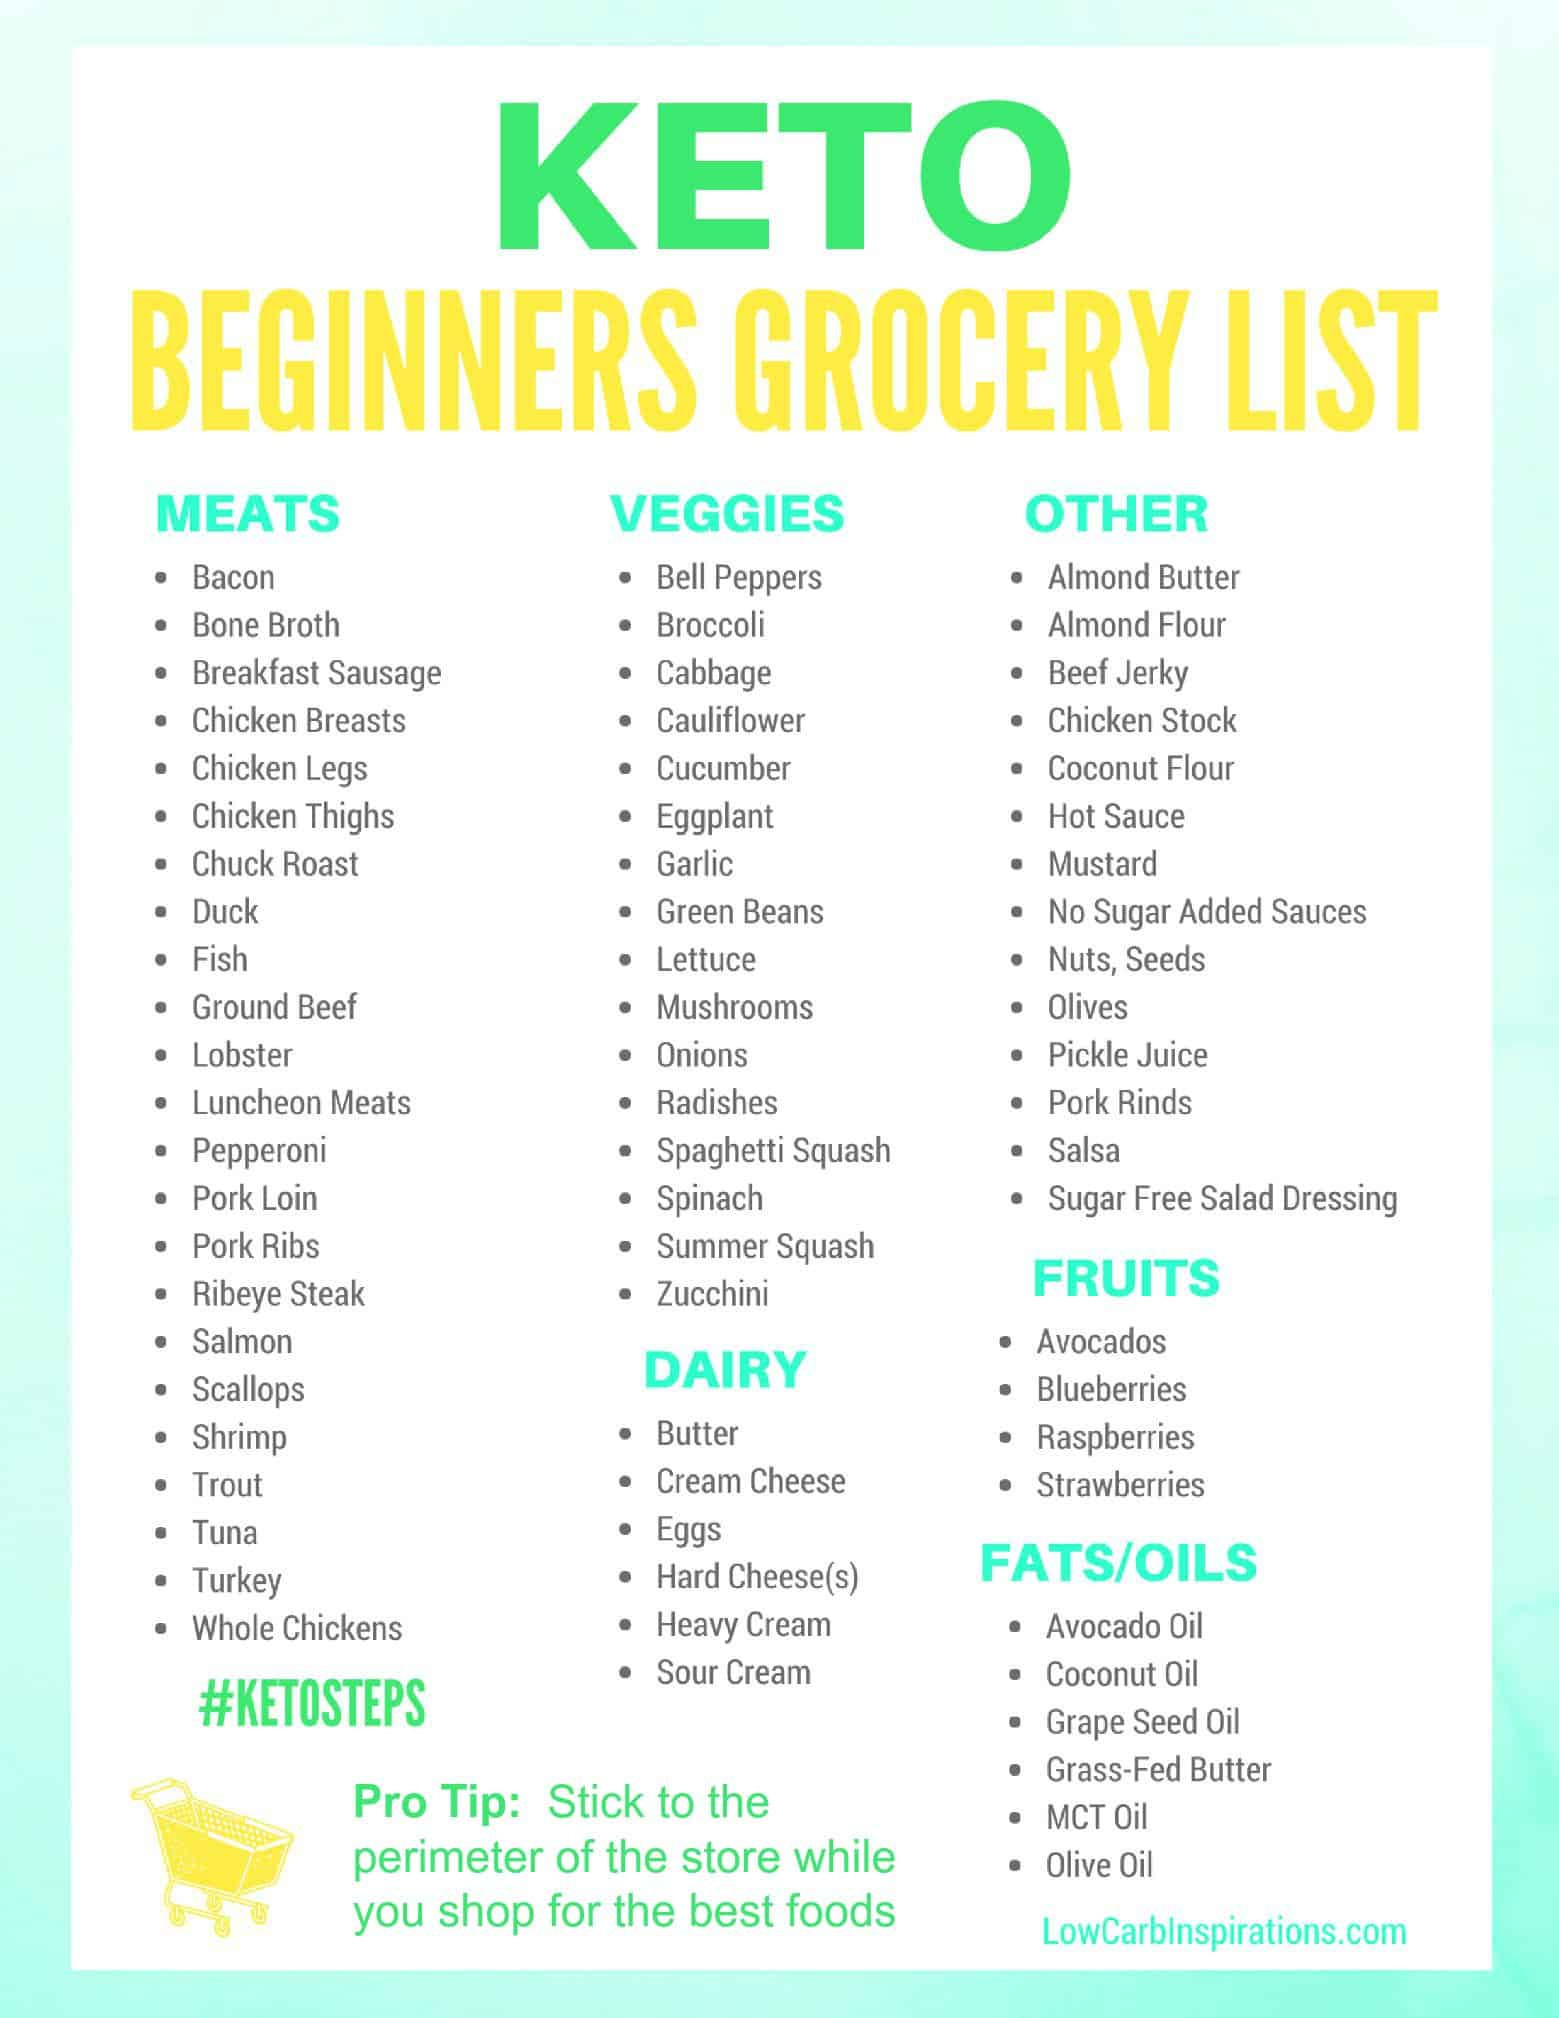 Keto Diet For Beginners Losing Weight Grocery List
 Keto Grocery List for Beginners iSaveA2Z